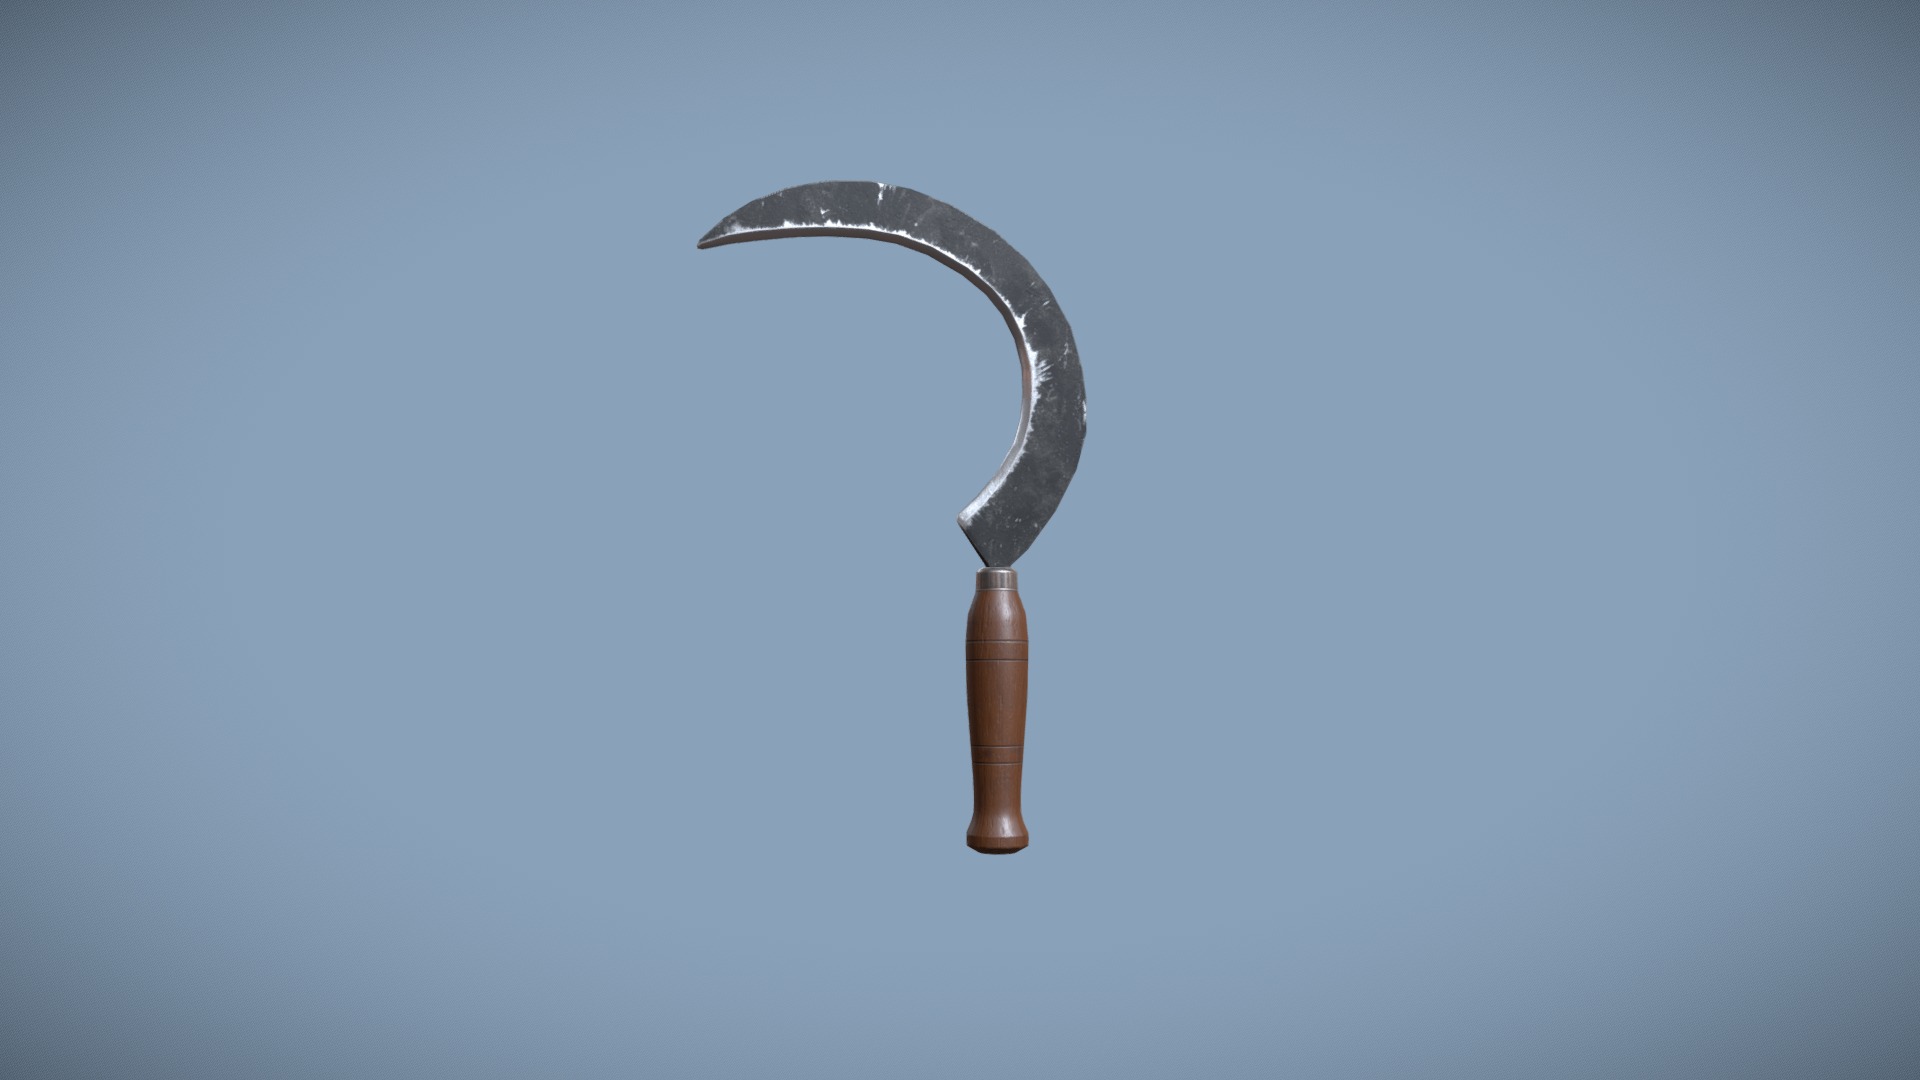 3D model Low poly garden sickle - This is a 3D model of the Low poly garden sickle. The 3D model is about a metal object with a handle.